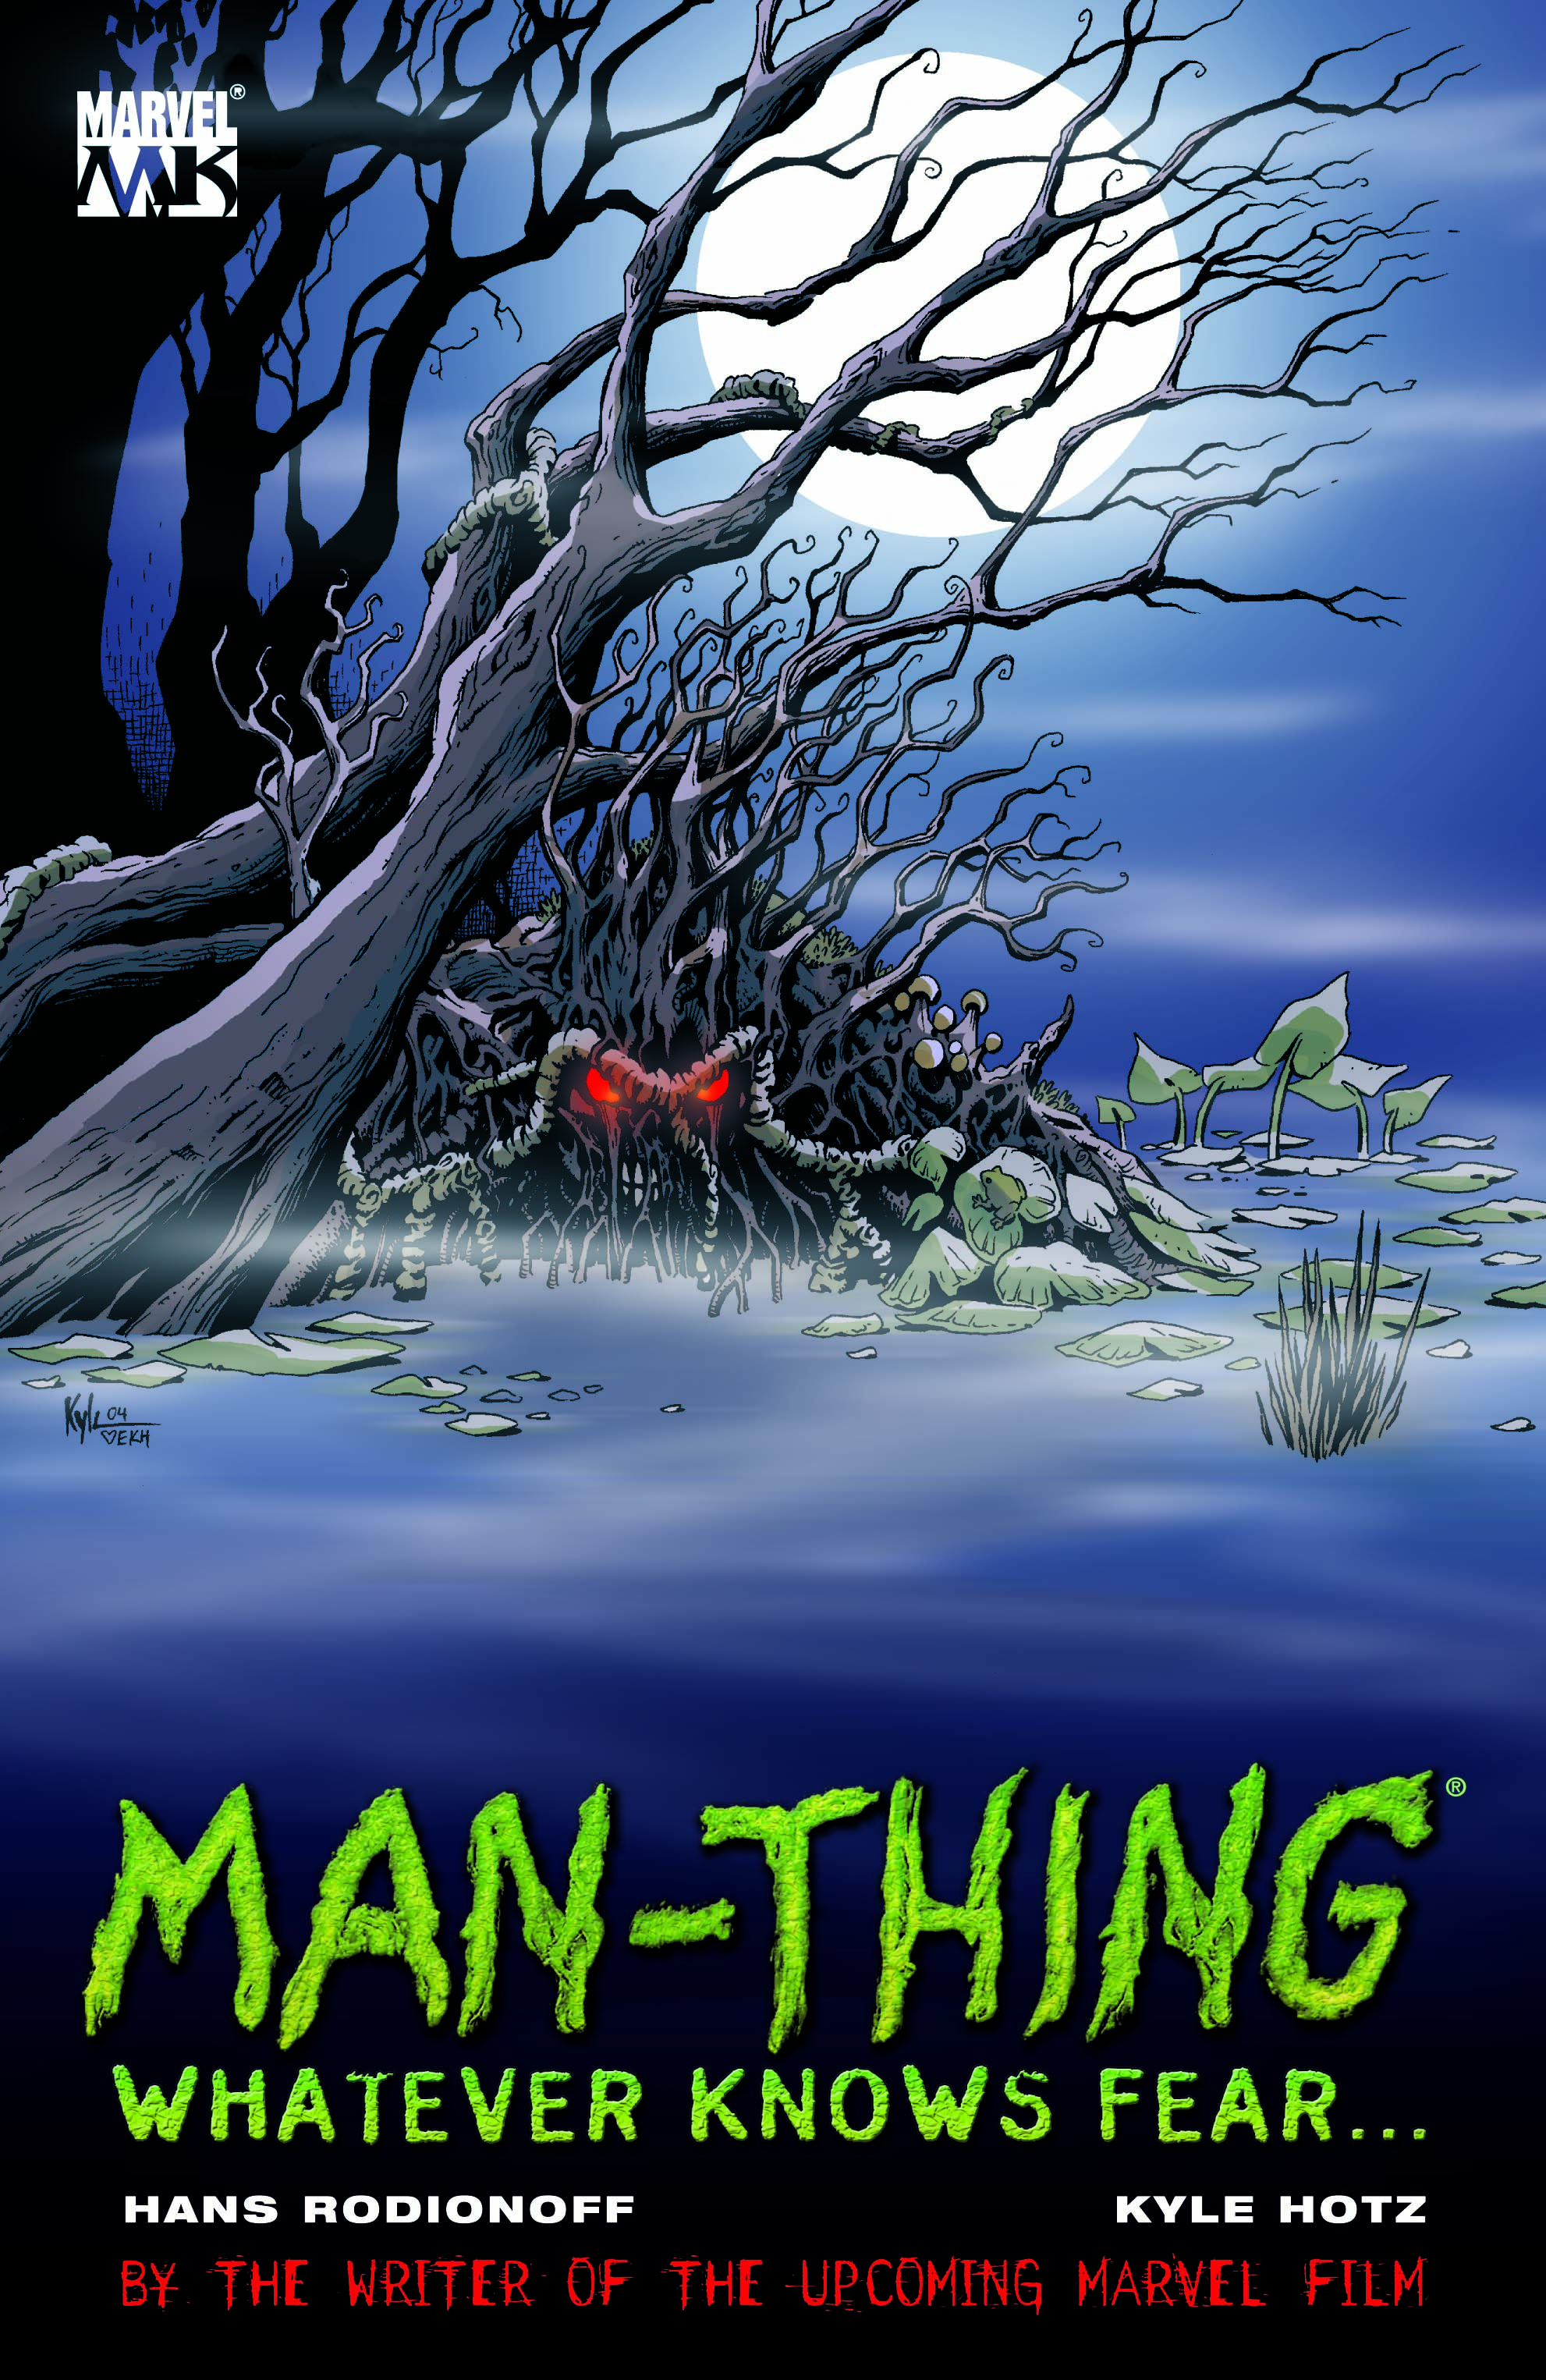 MAN-THING: WHATEVER KNOWS FEAR TPB (Trade Paperback)